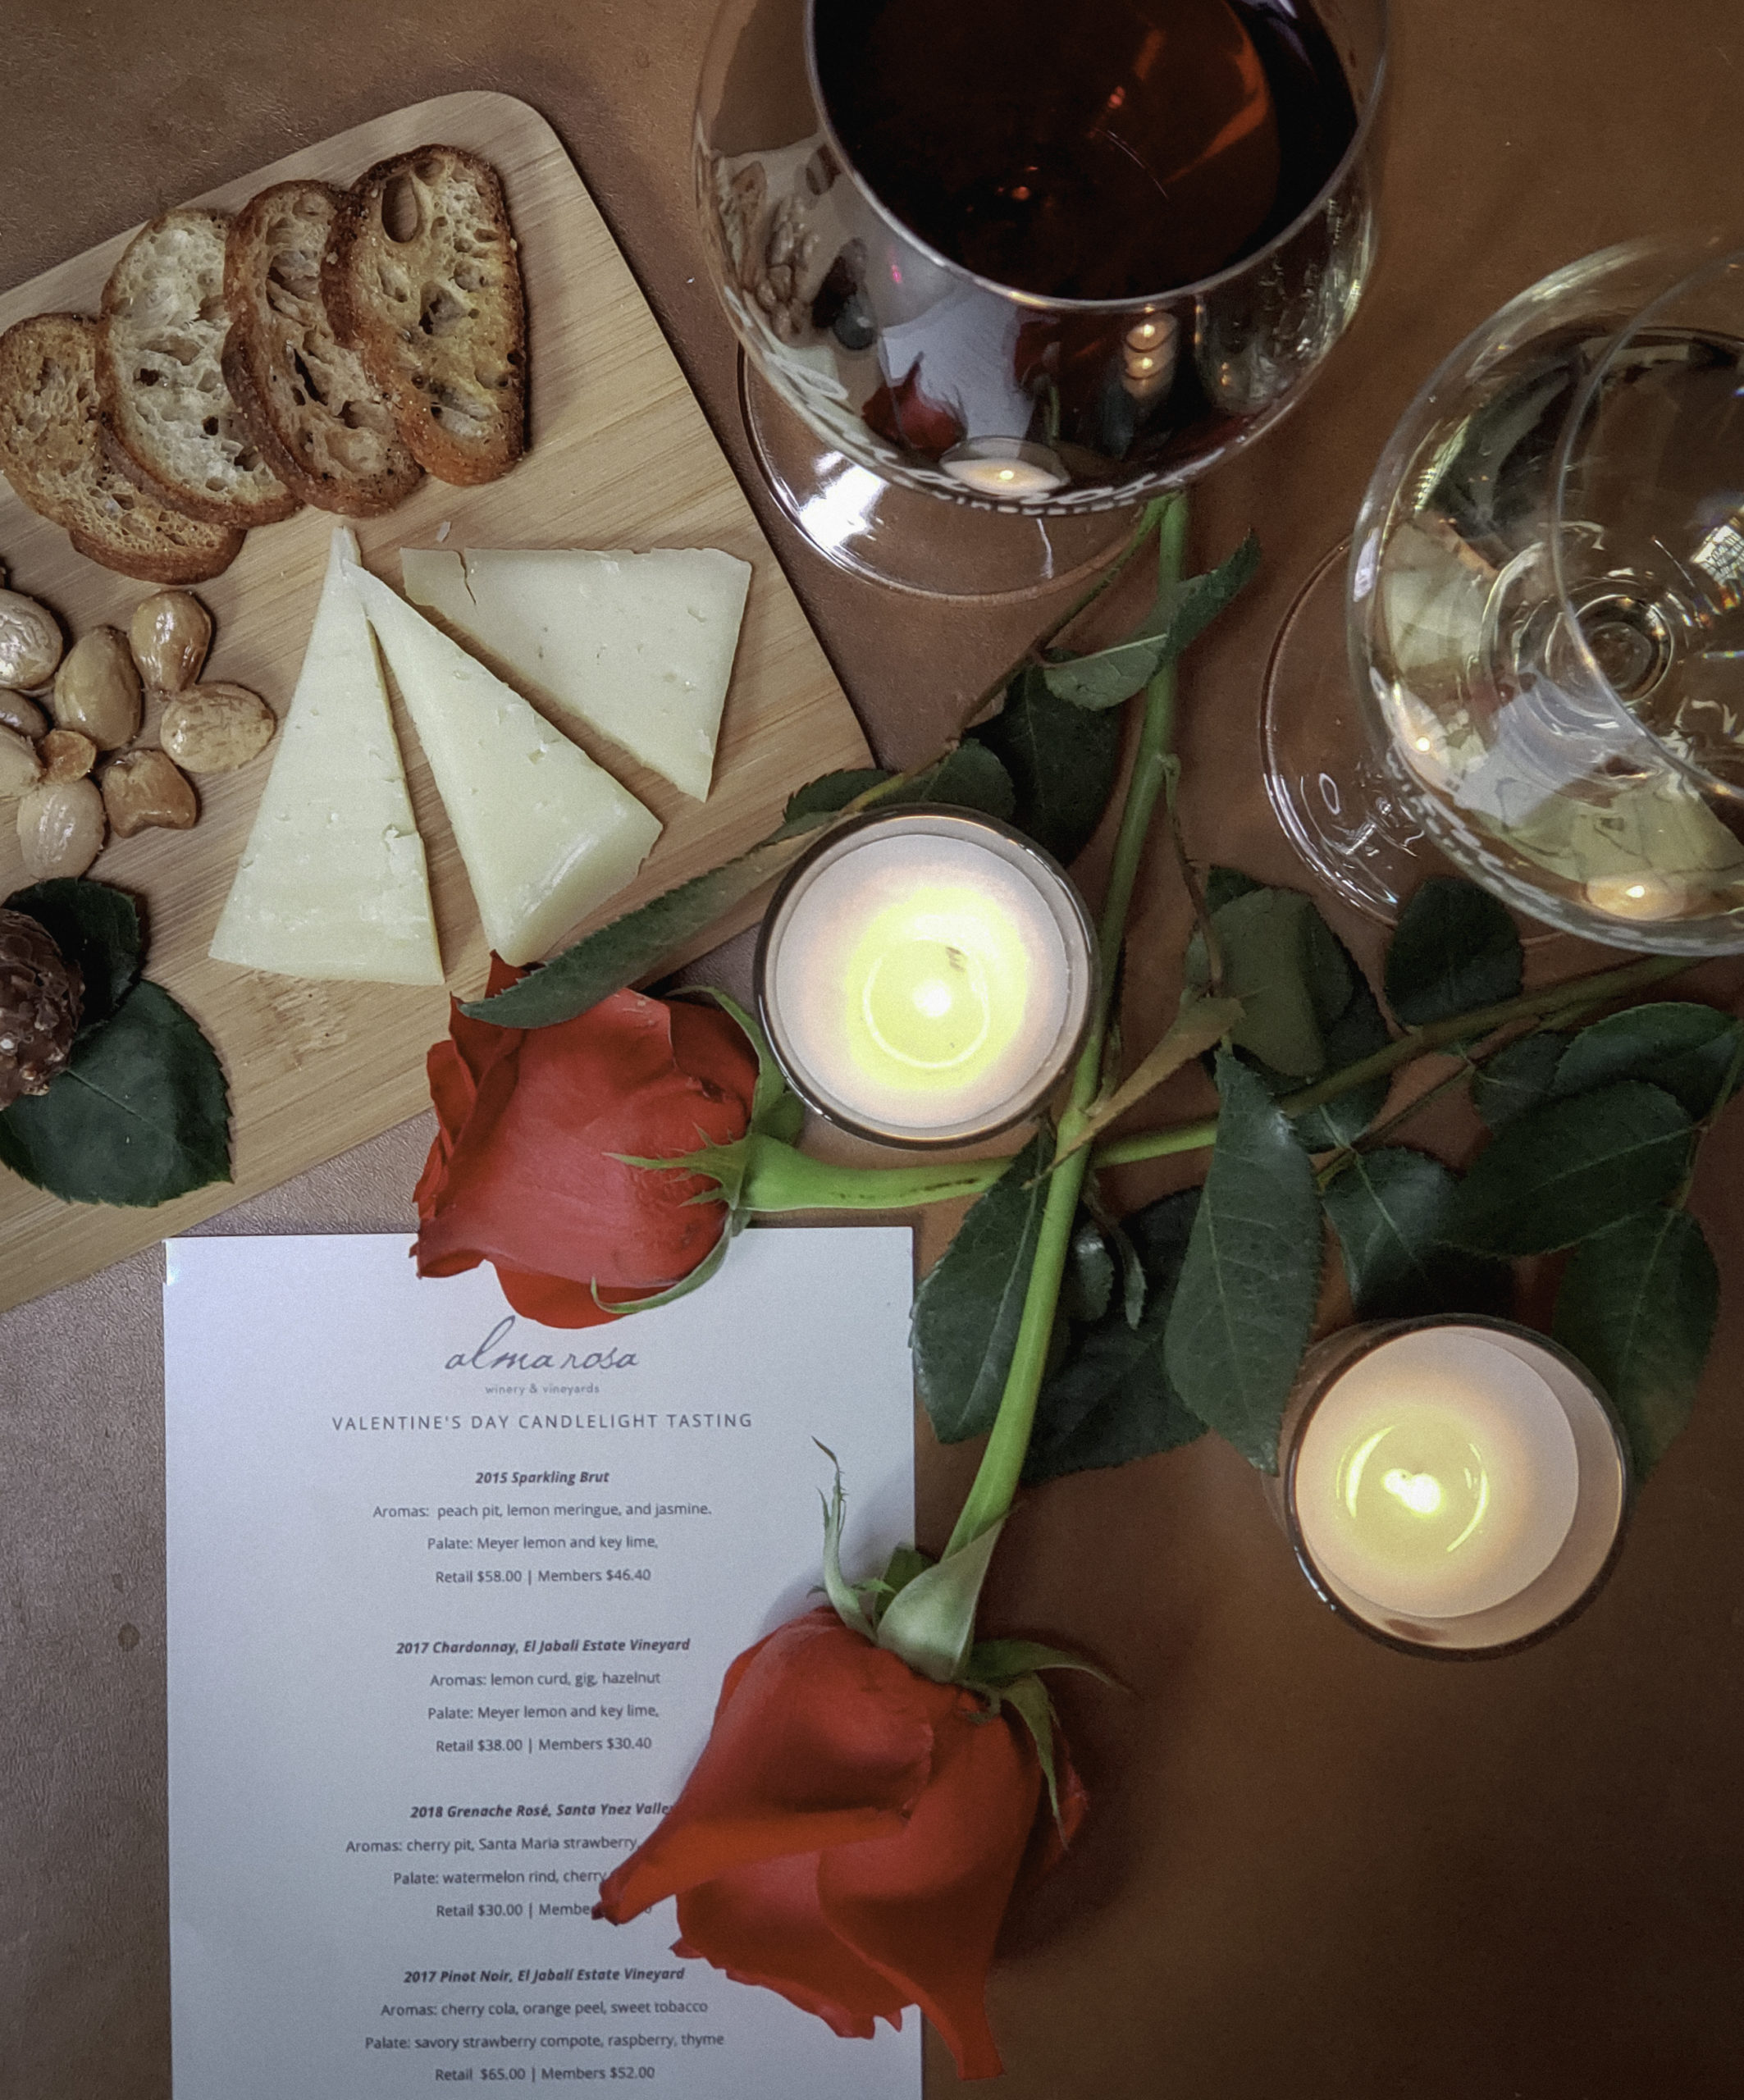 Valentine’s Candlelight Tasting at Alma Rosa Winery